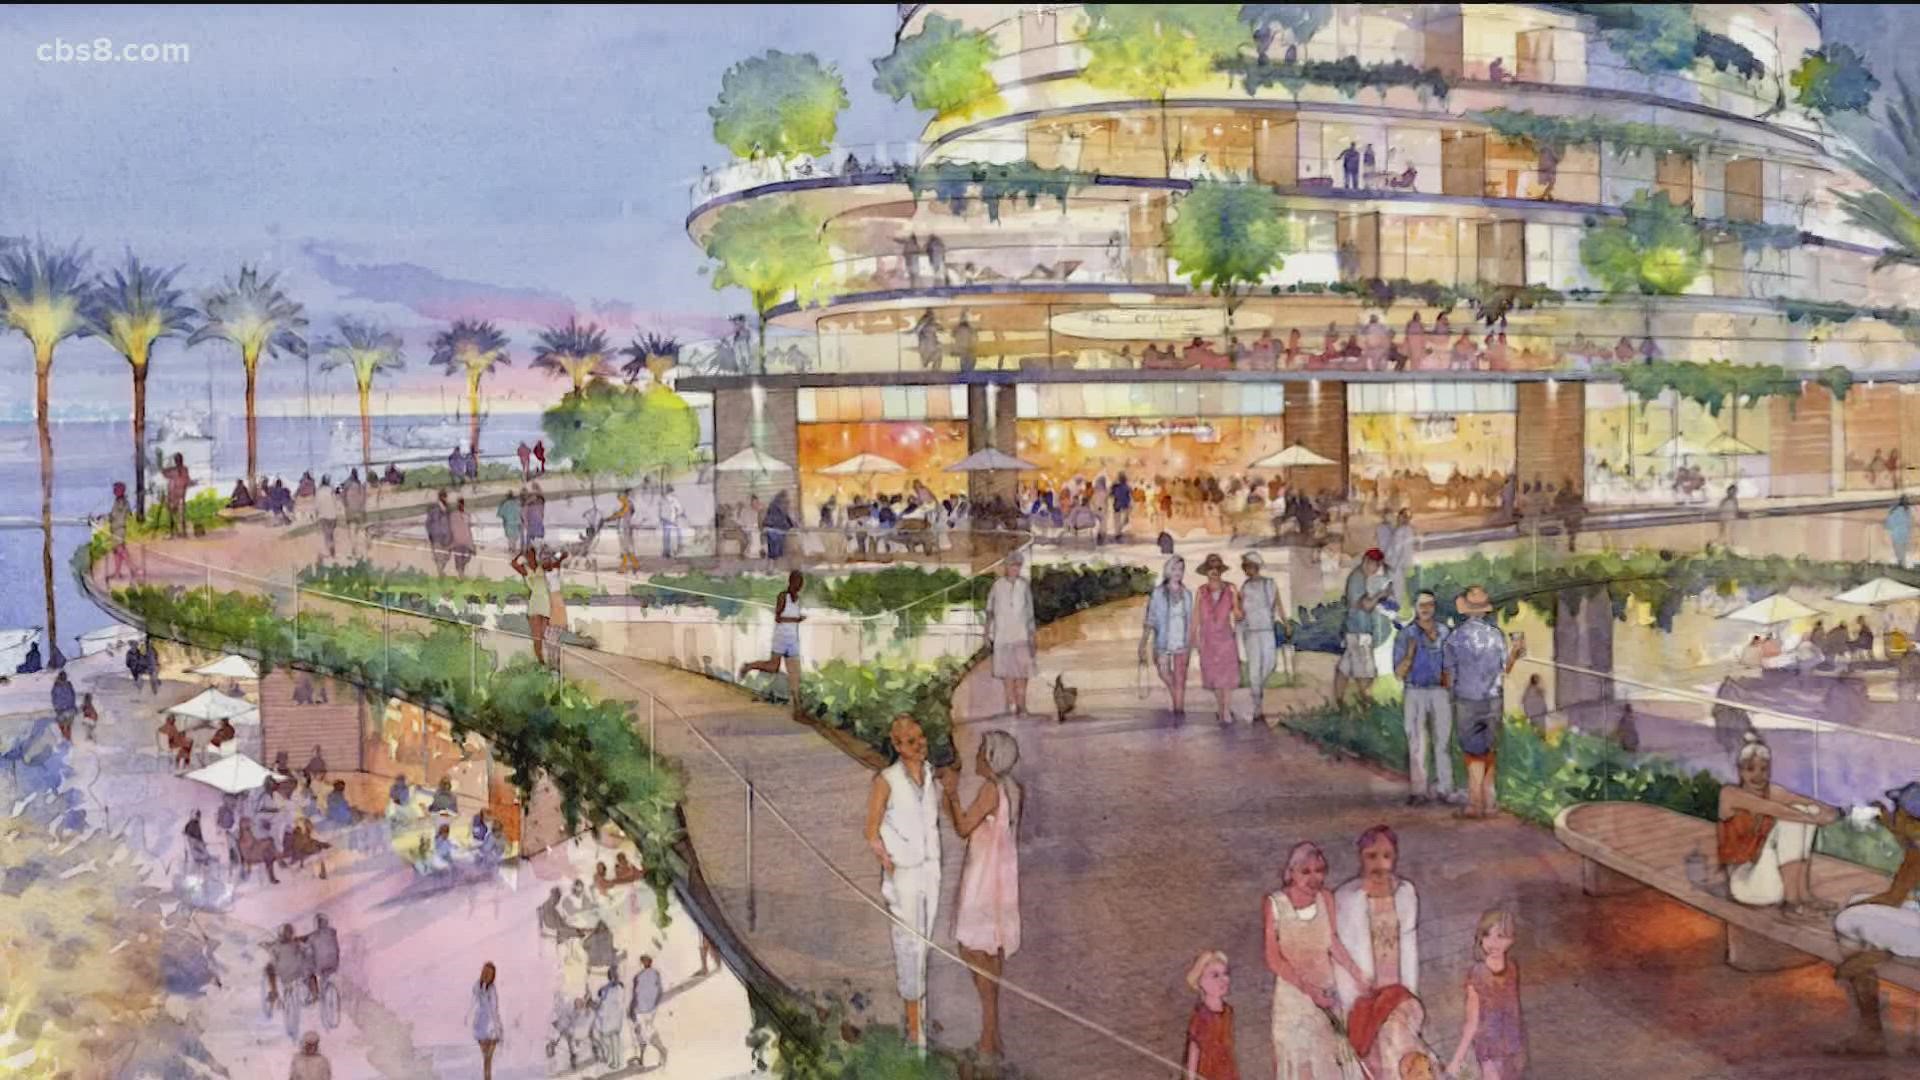 $3.5B Seaport Village upgrades under review by Port of San Diego